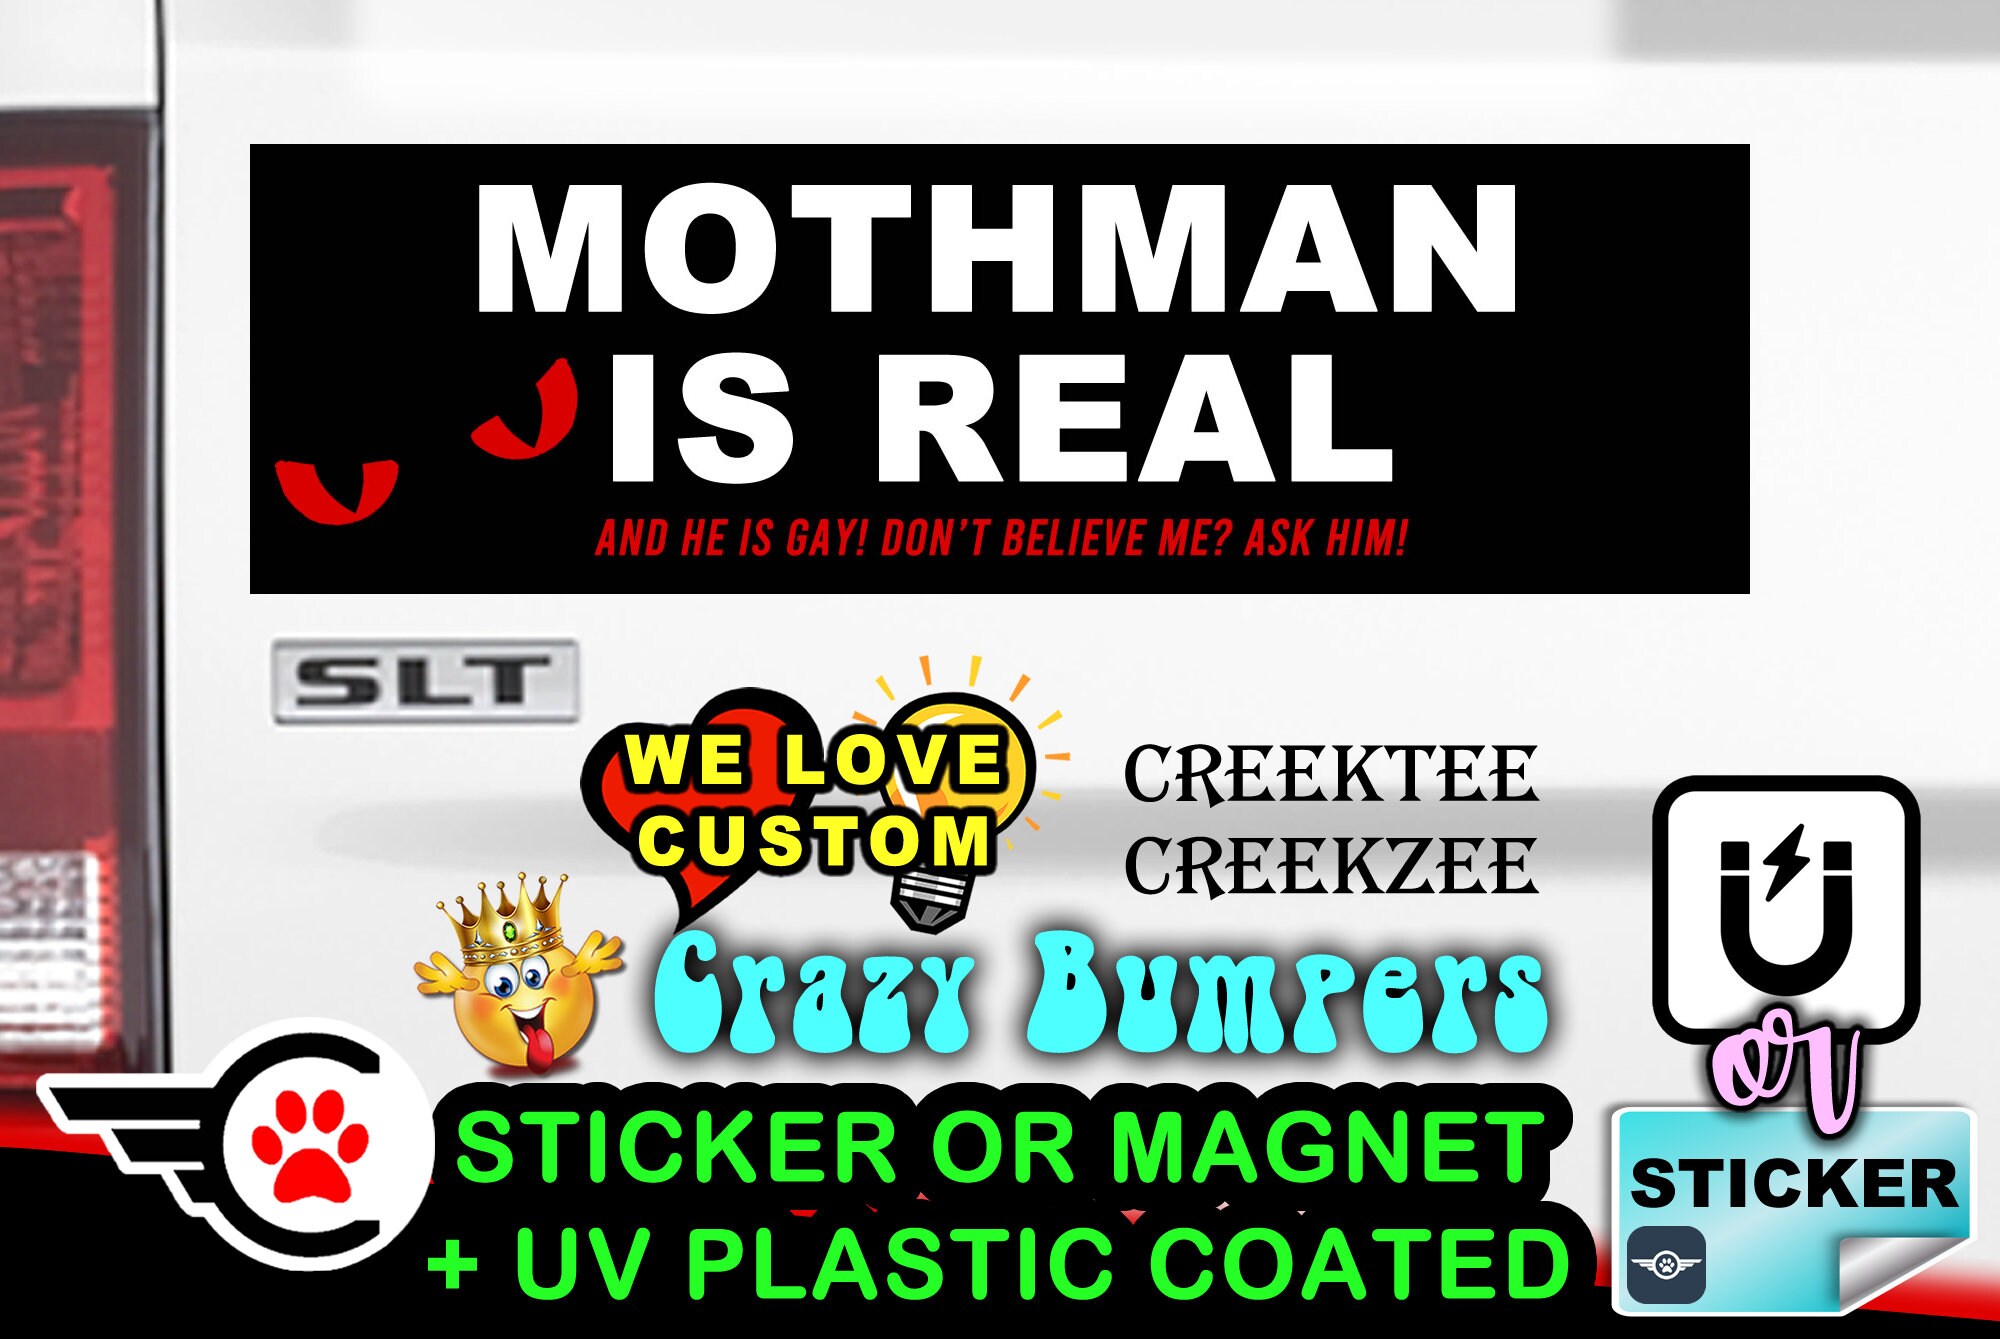 Mothman Is Real And He Is Gay - Funny Bumper Sticker or Magnet sizes 4